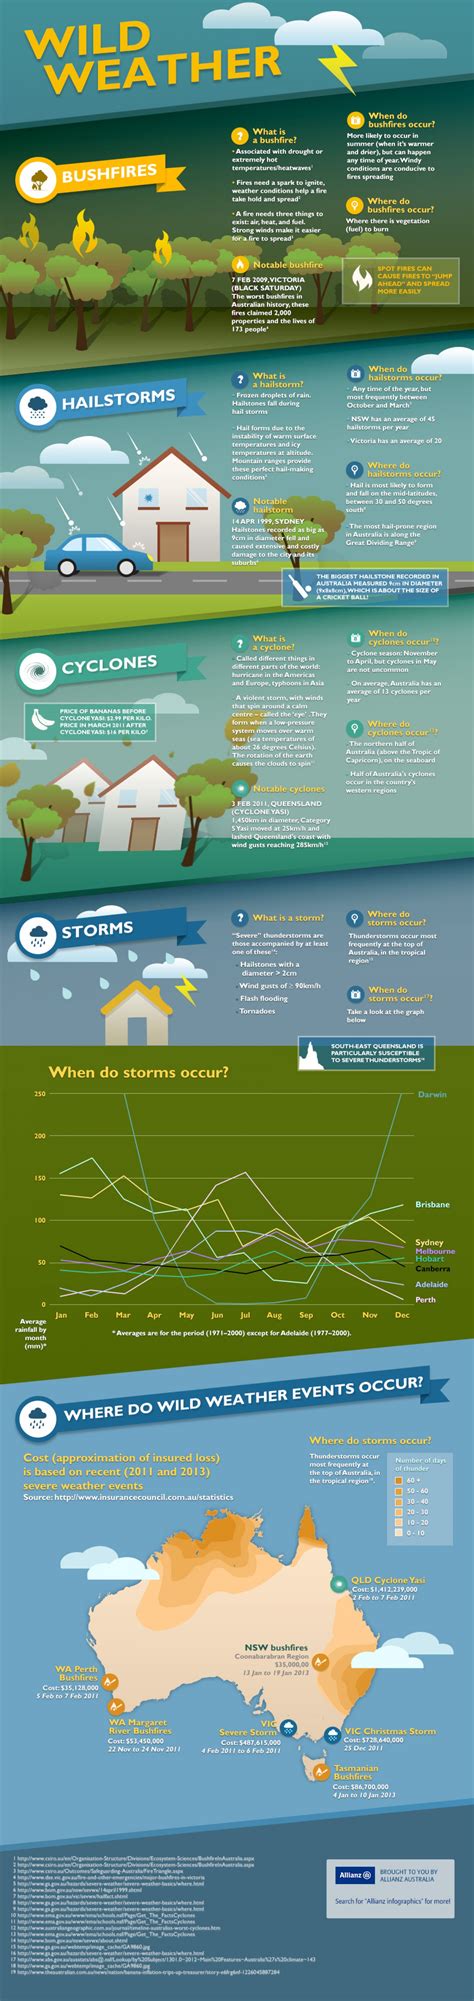 Wild weather Infographic | Wild weather, Weather and climate, Weather